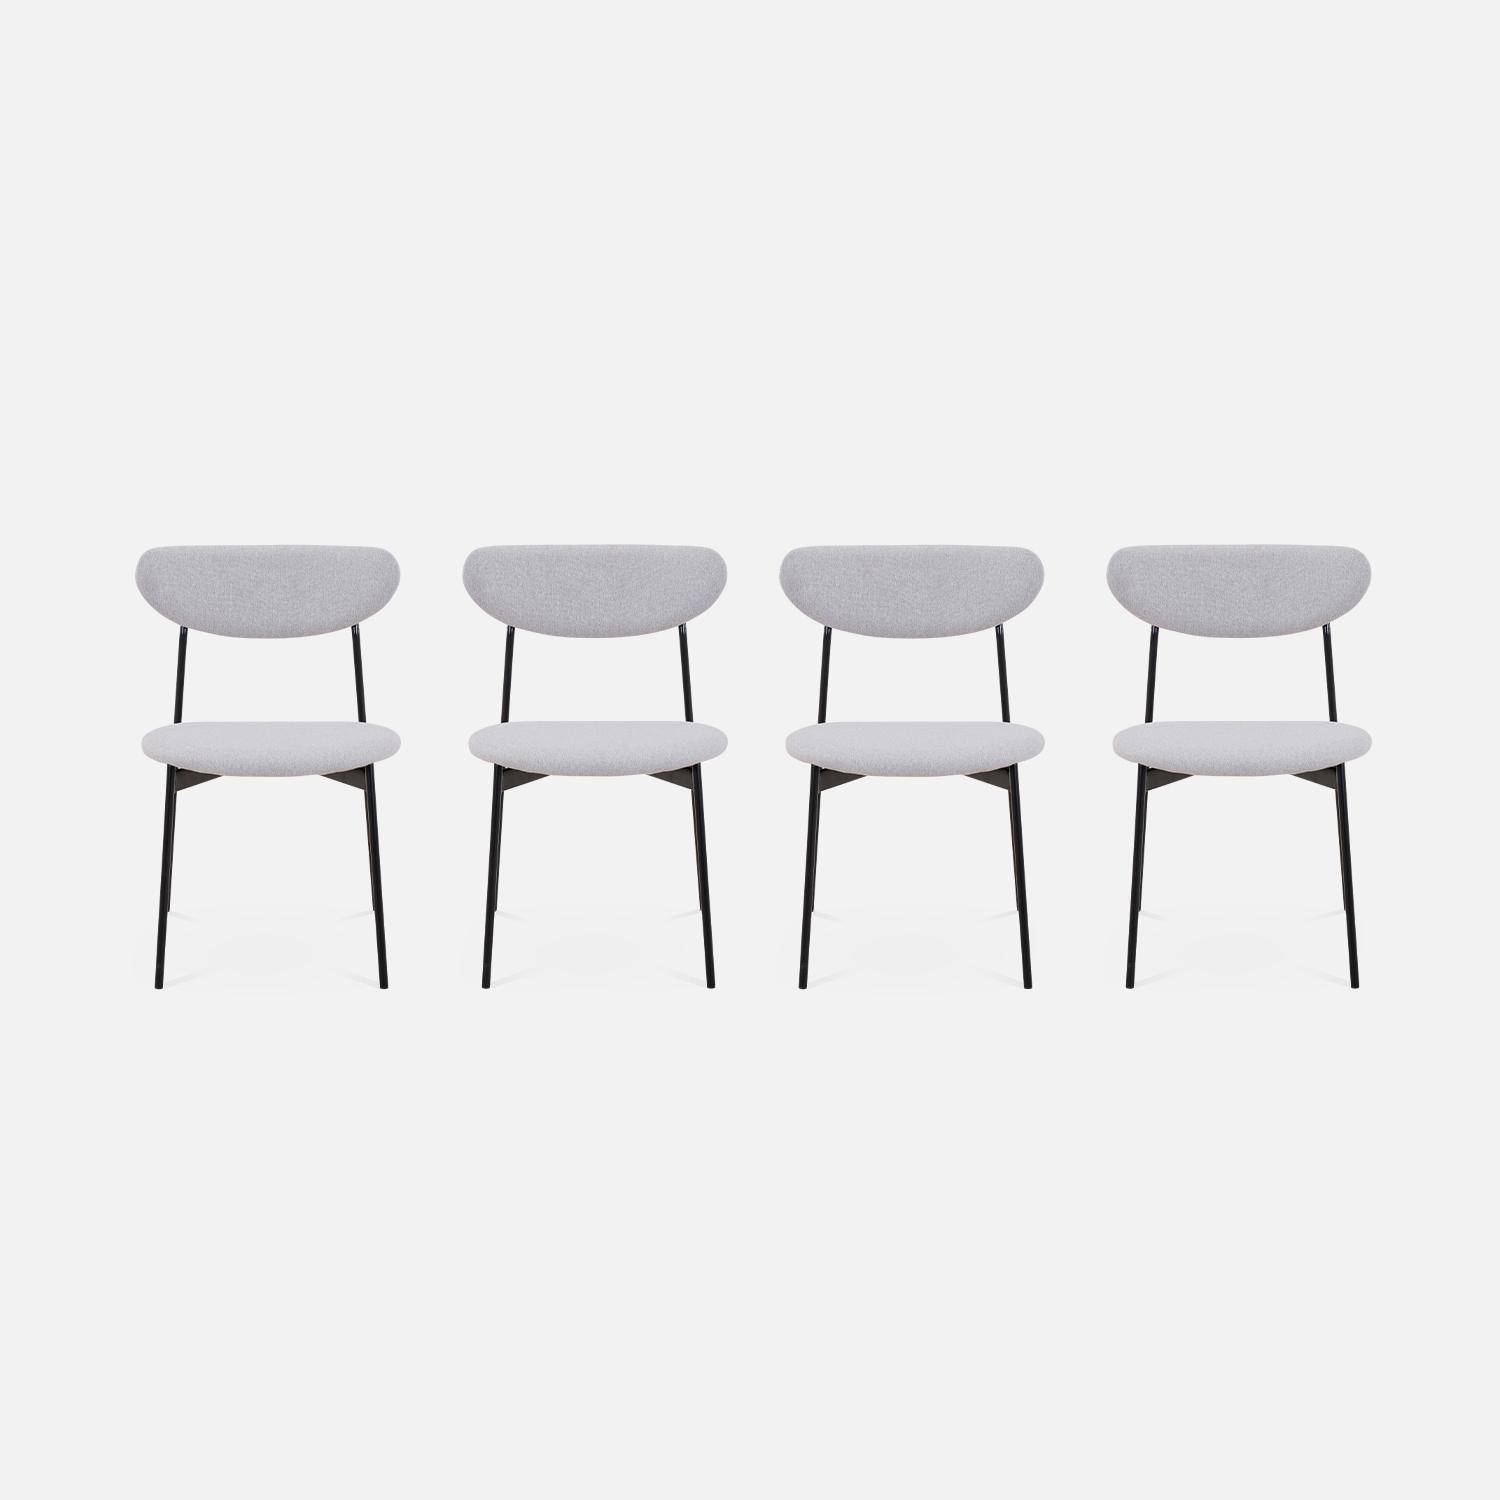 Set of 4 retro style dining chairs with steel legs - Arty - Light Grey Photo4